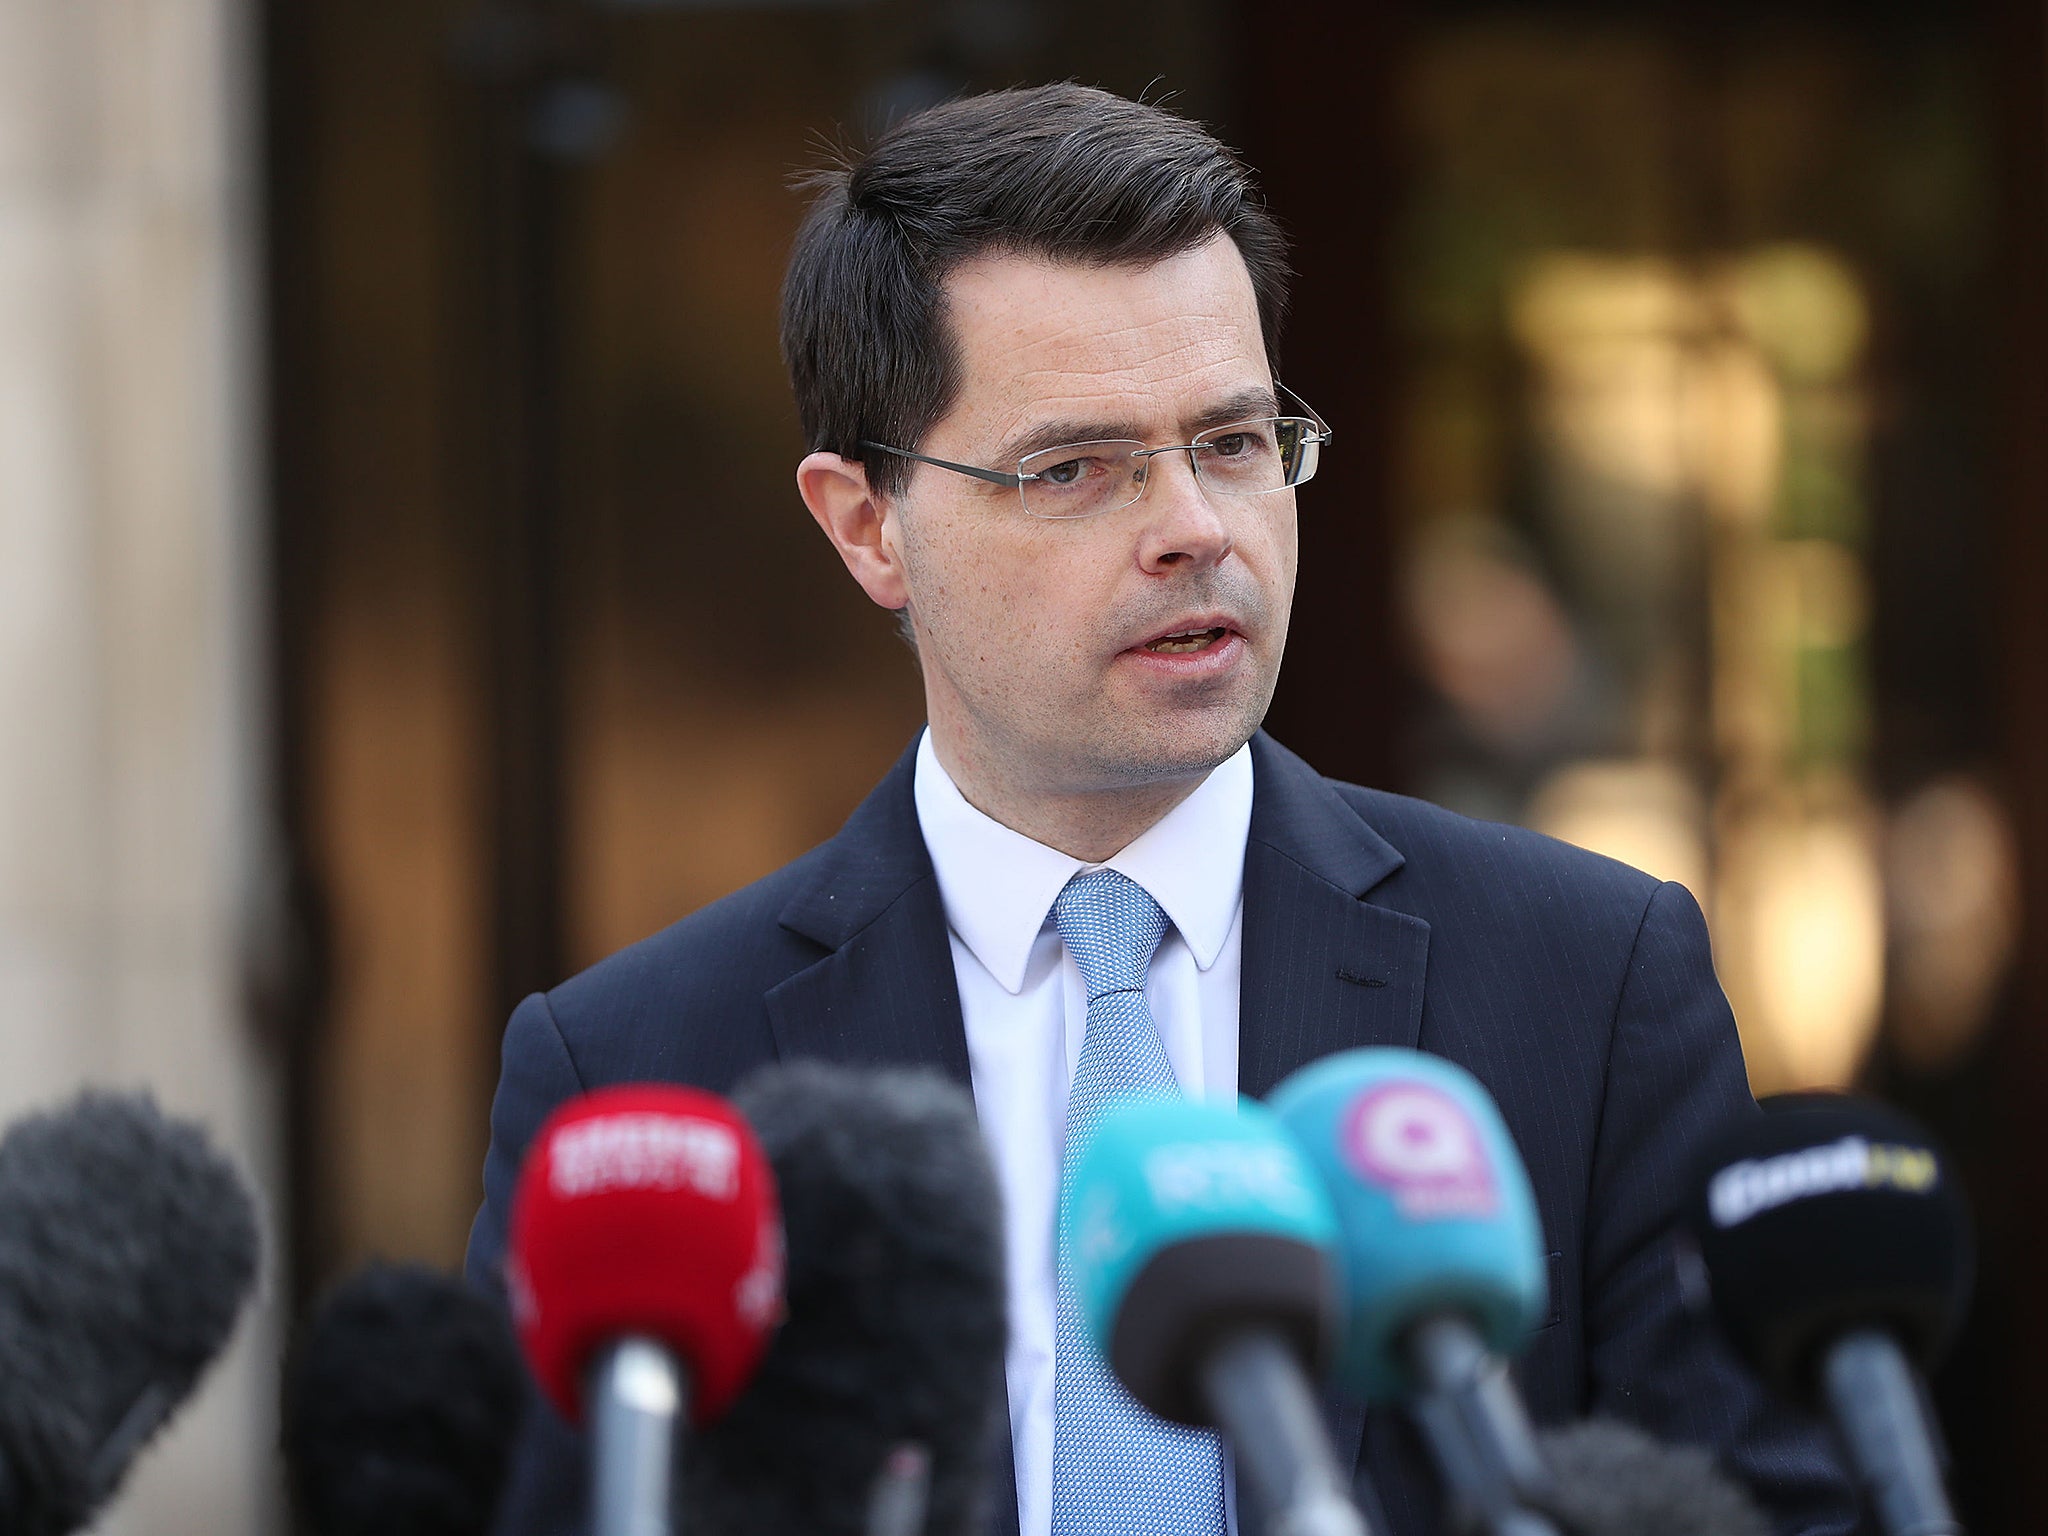 James Brokenshire stands down as Northern Ireland Secretary following reports of ill health